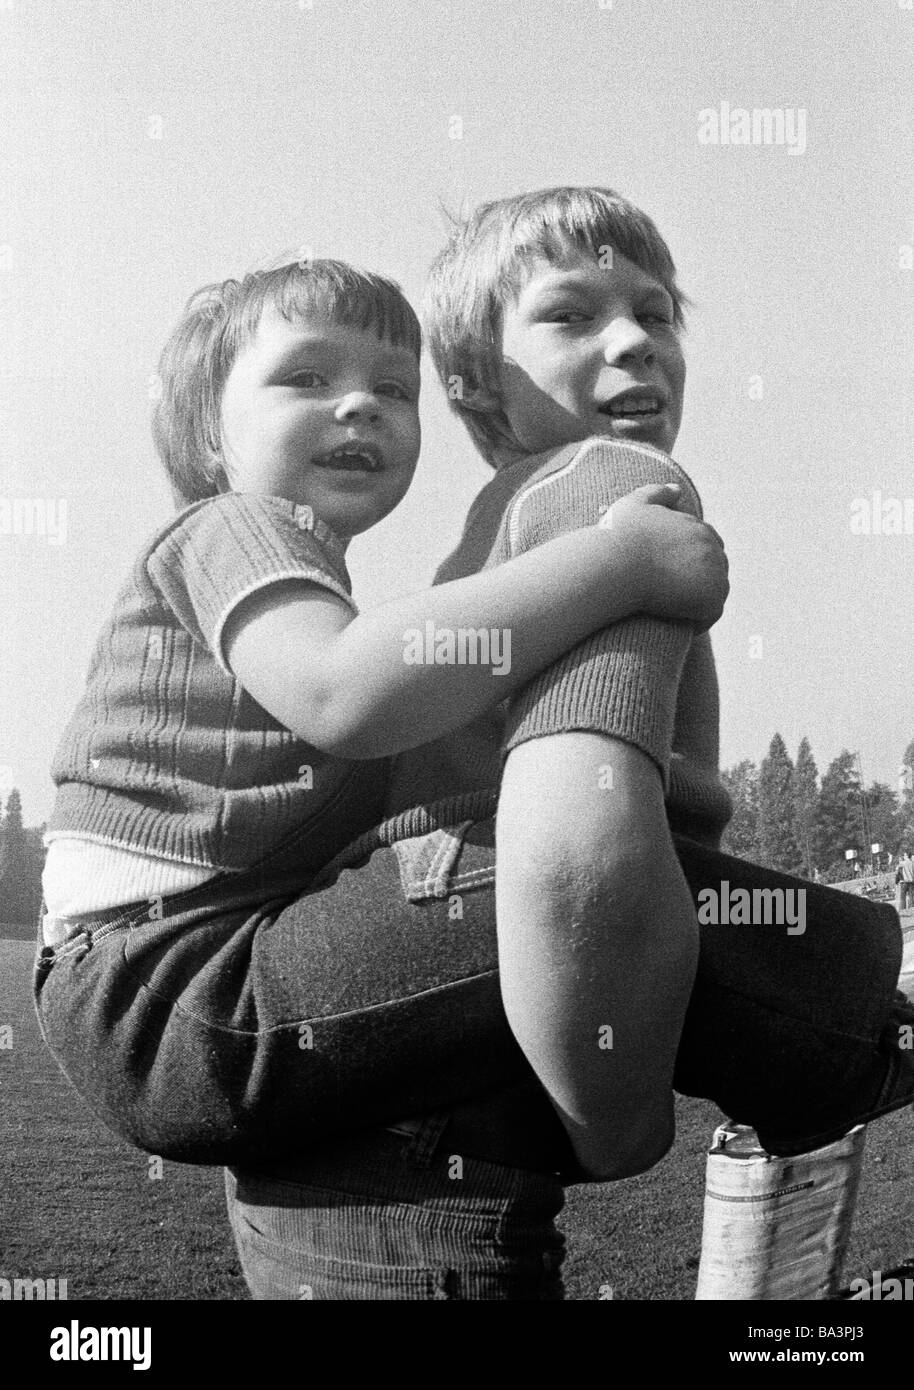 Seventies, black and white photo, people, children, boy bears a younger boy piggyback, aged 10 to 13 years, aged 6 to 8 years Stock Photo